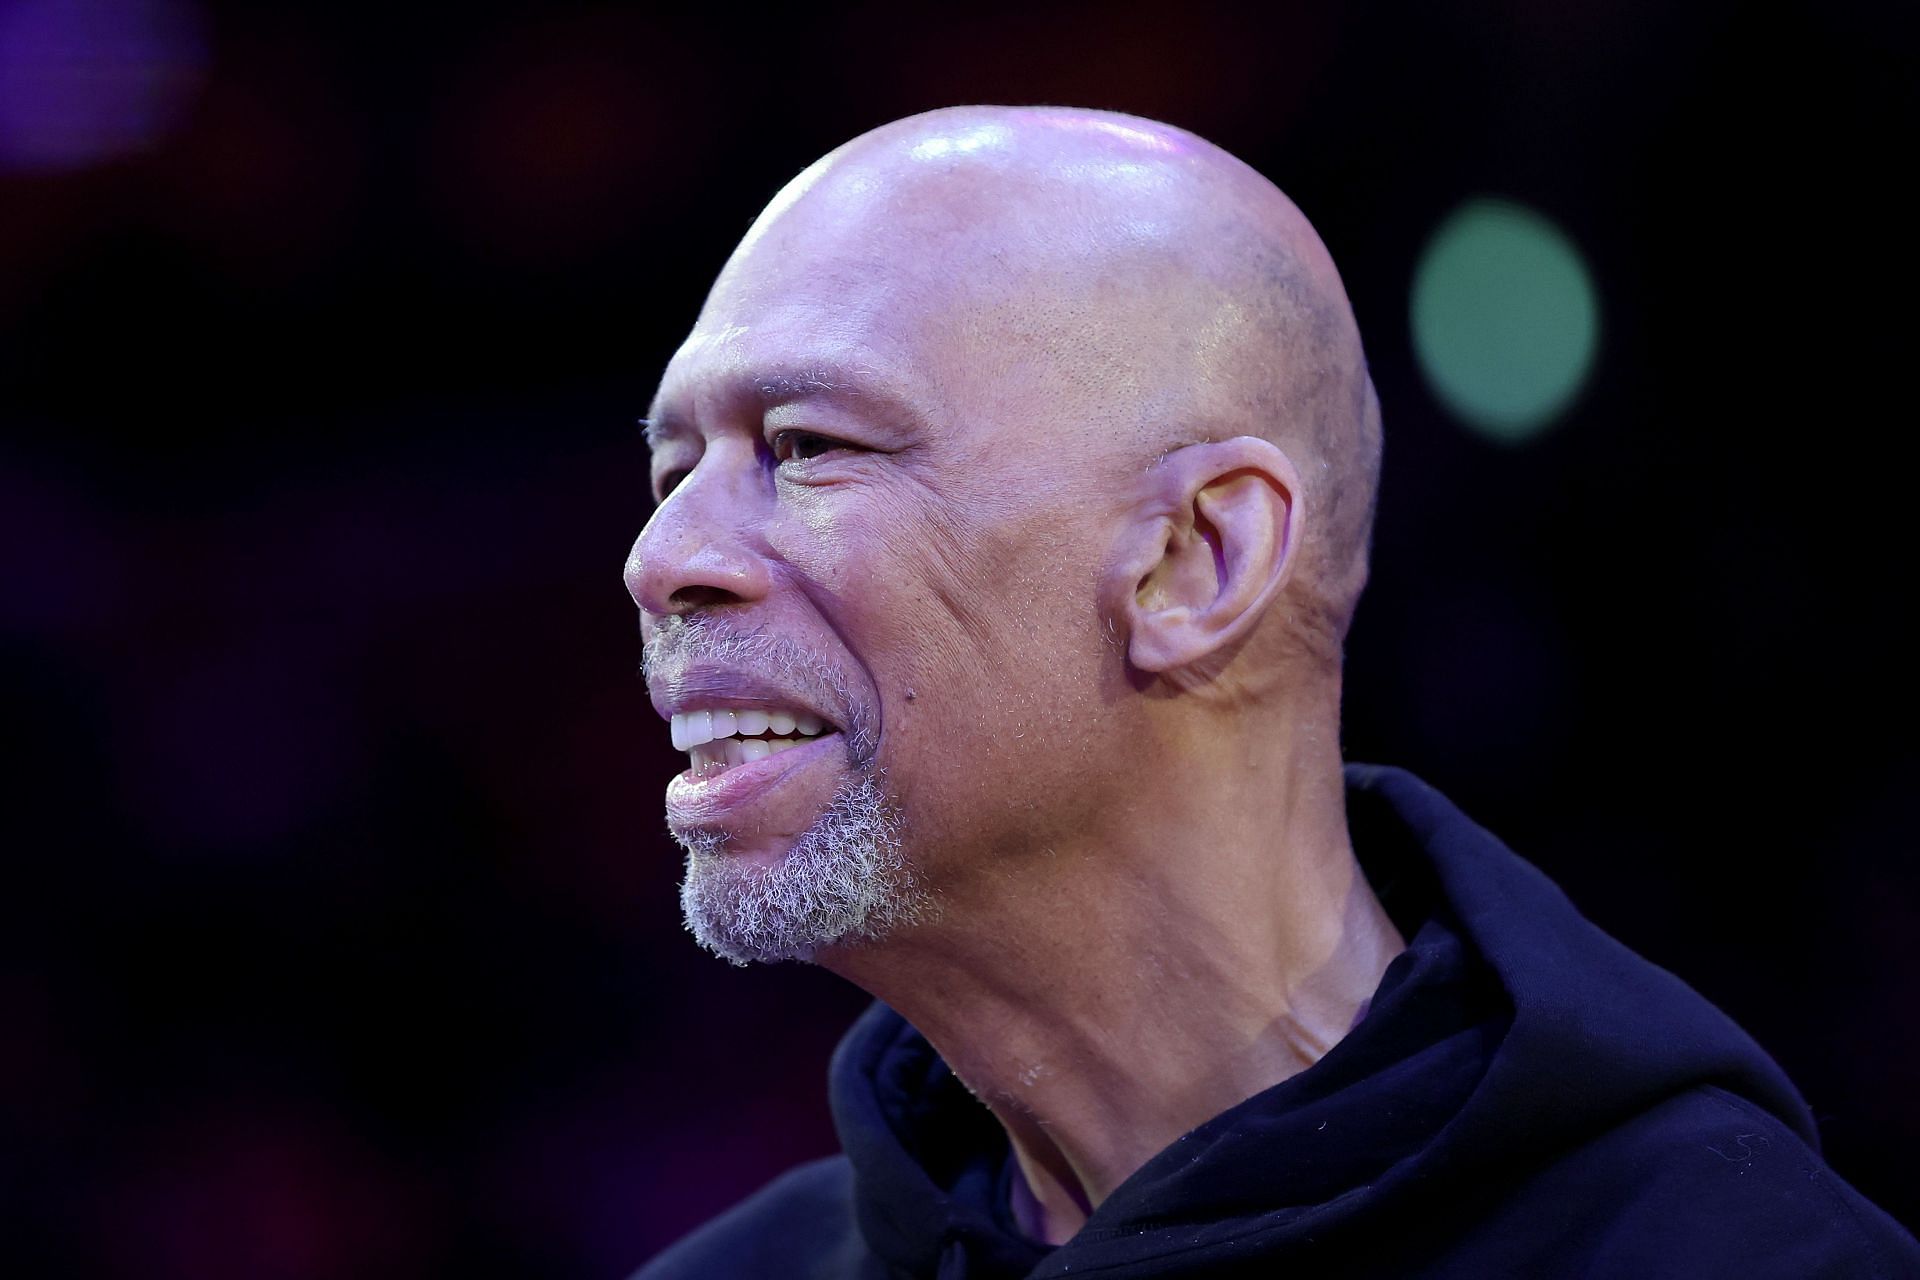 Kareem Abdul-Jabbar Has A Hilarious Response When Asked What The Best Hot  Dog Topping Is: Tears Of The 1985 Celtics When They Lost To The Lakers In  The Finals - Fadeaway World